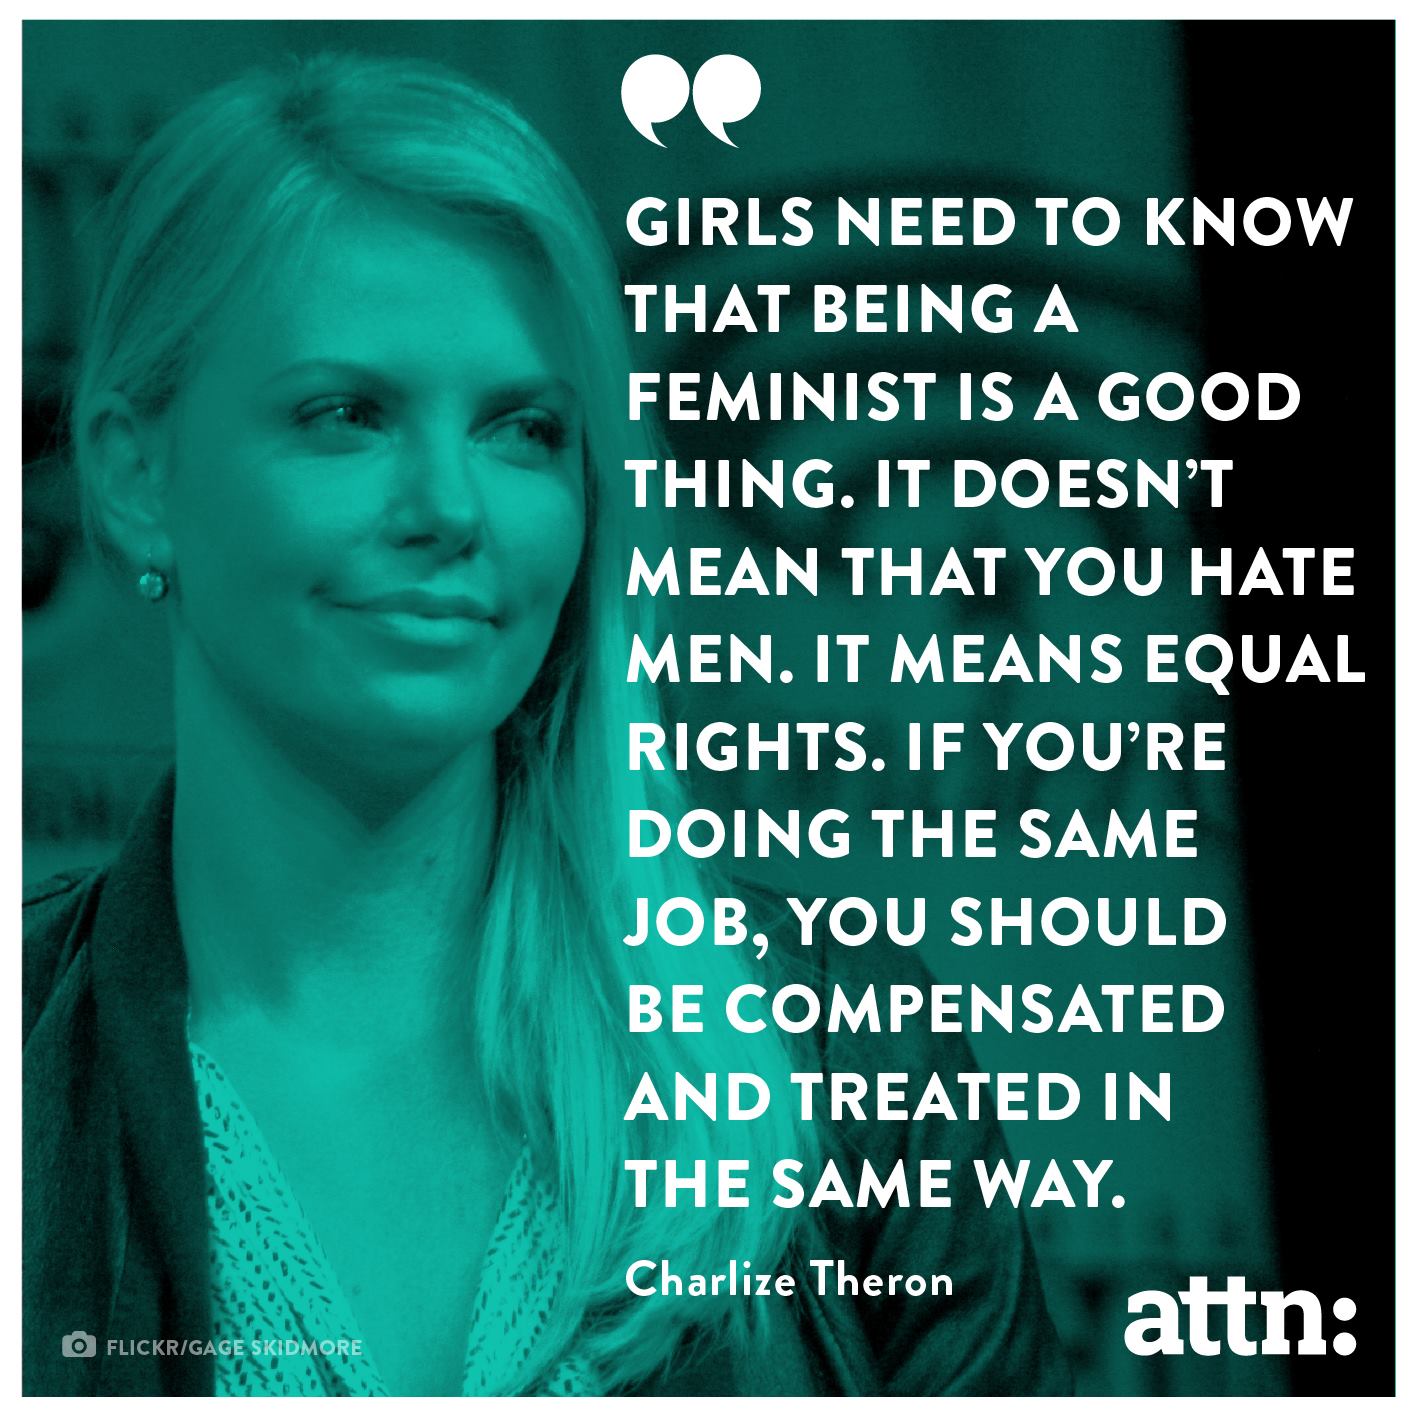 Well said feminist quote by Charlize Theron